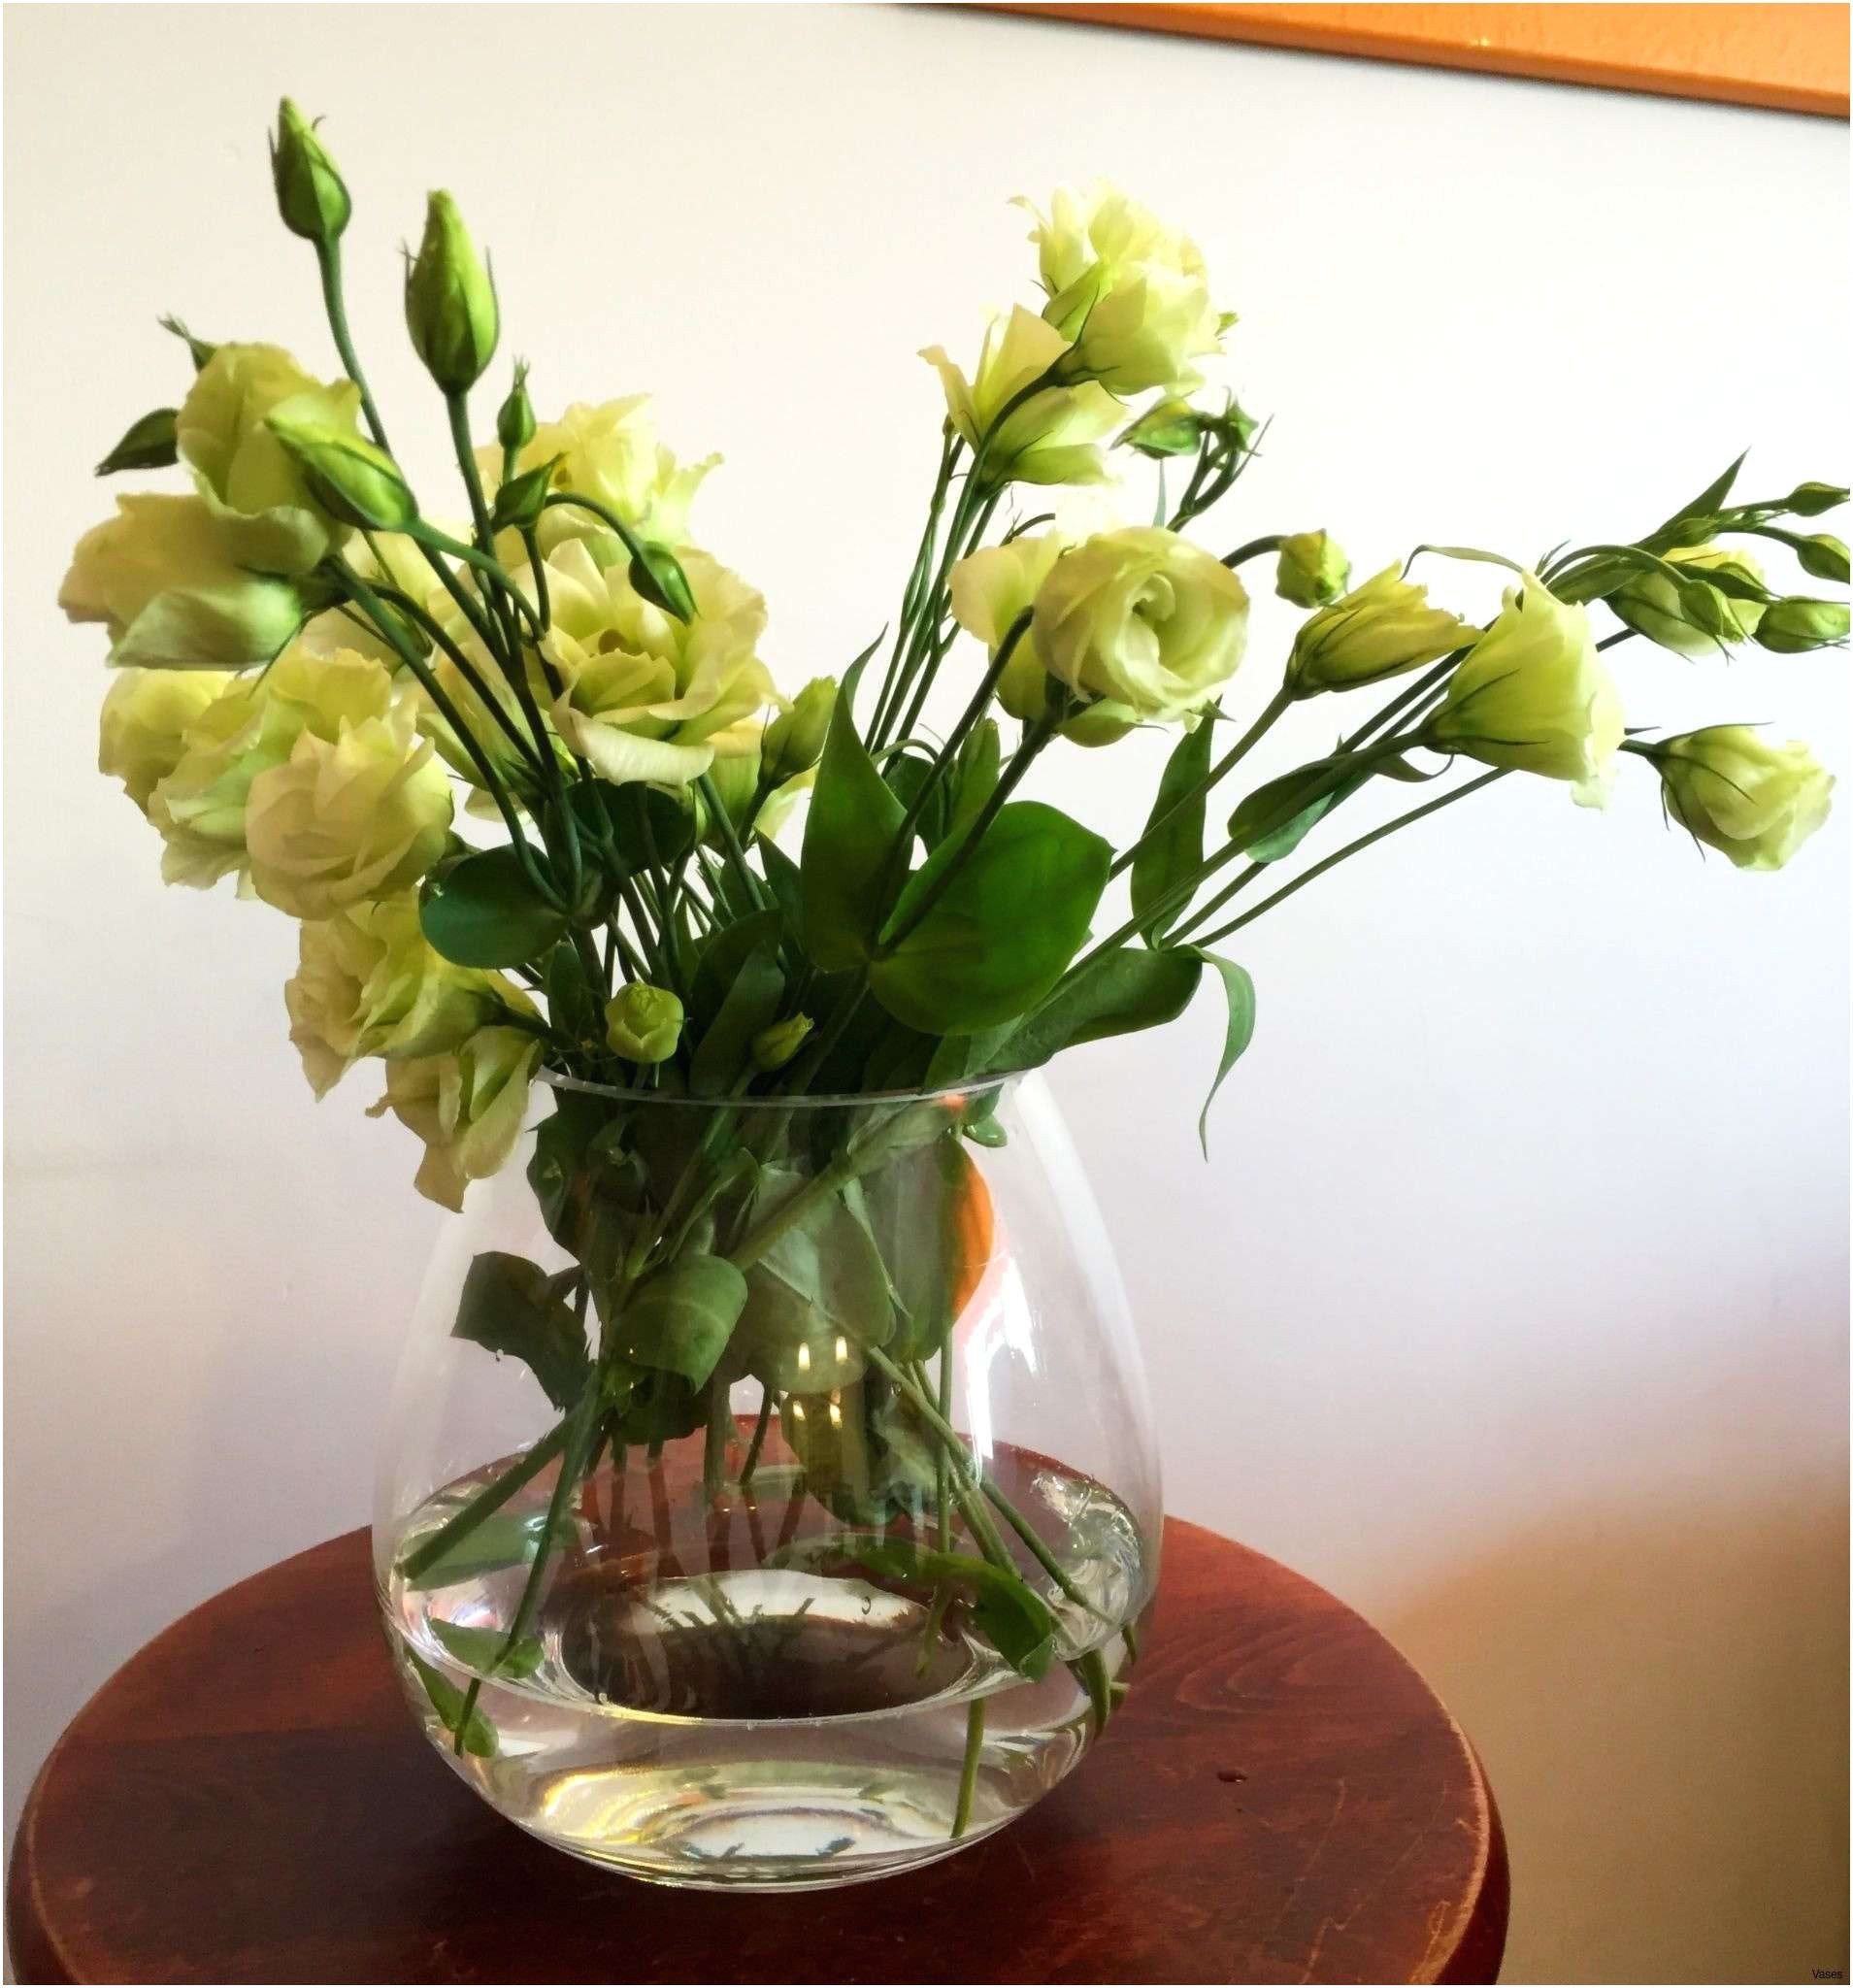 10 Fashionable Lenox Floral Vase 2022 free download lenox floral vase of green glass vase pictures vintage collection of 7 emerald green intended for green glass vase images tiger food phenomenal flower vase table 04h vases tablei 0d clipart 